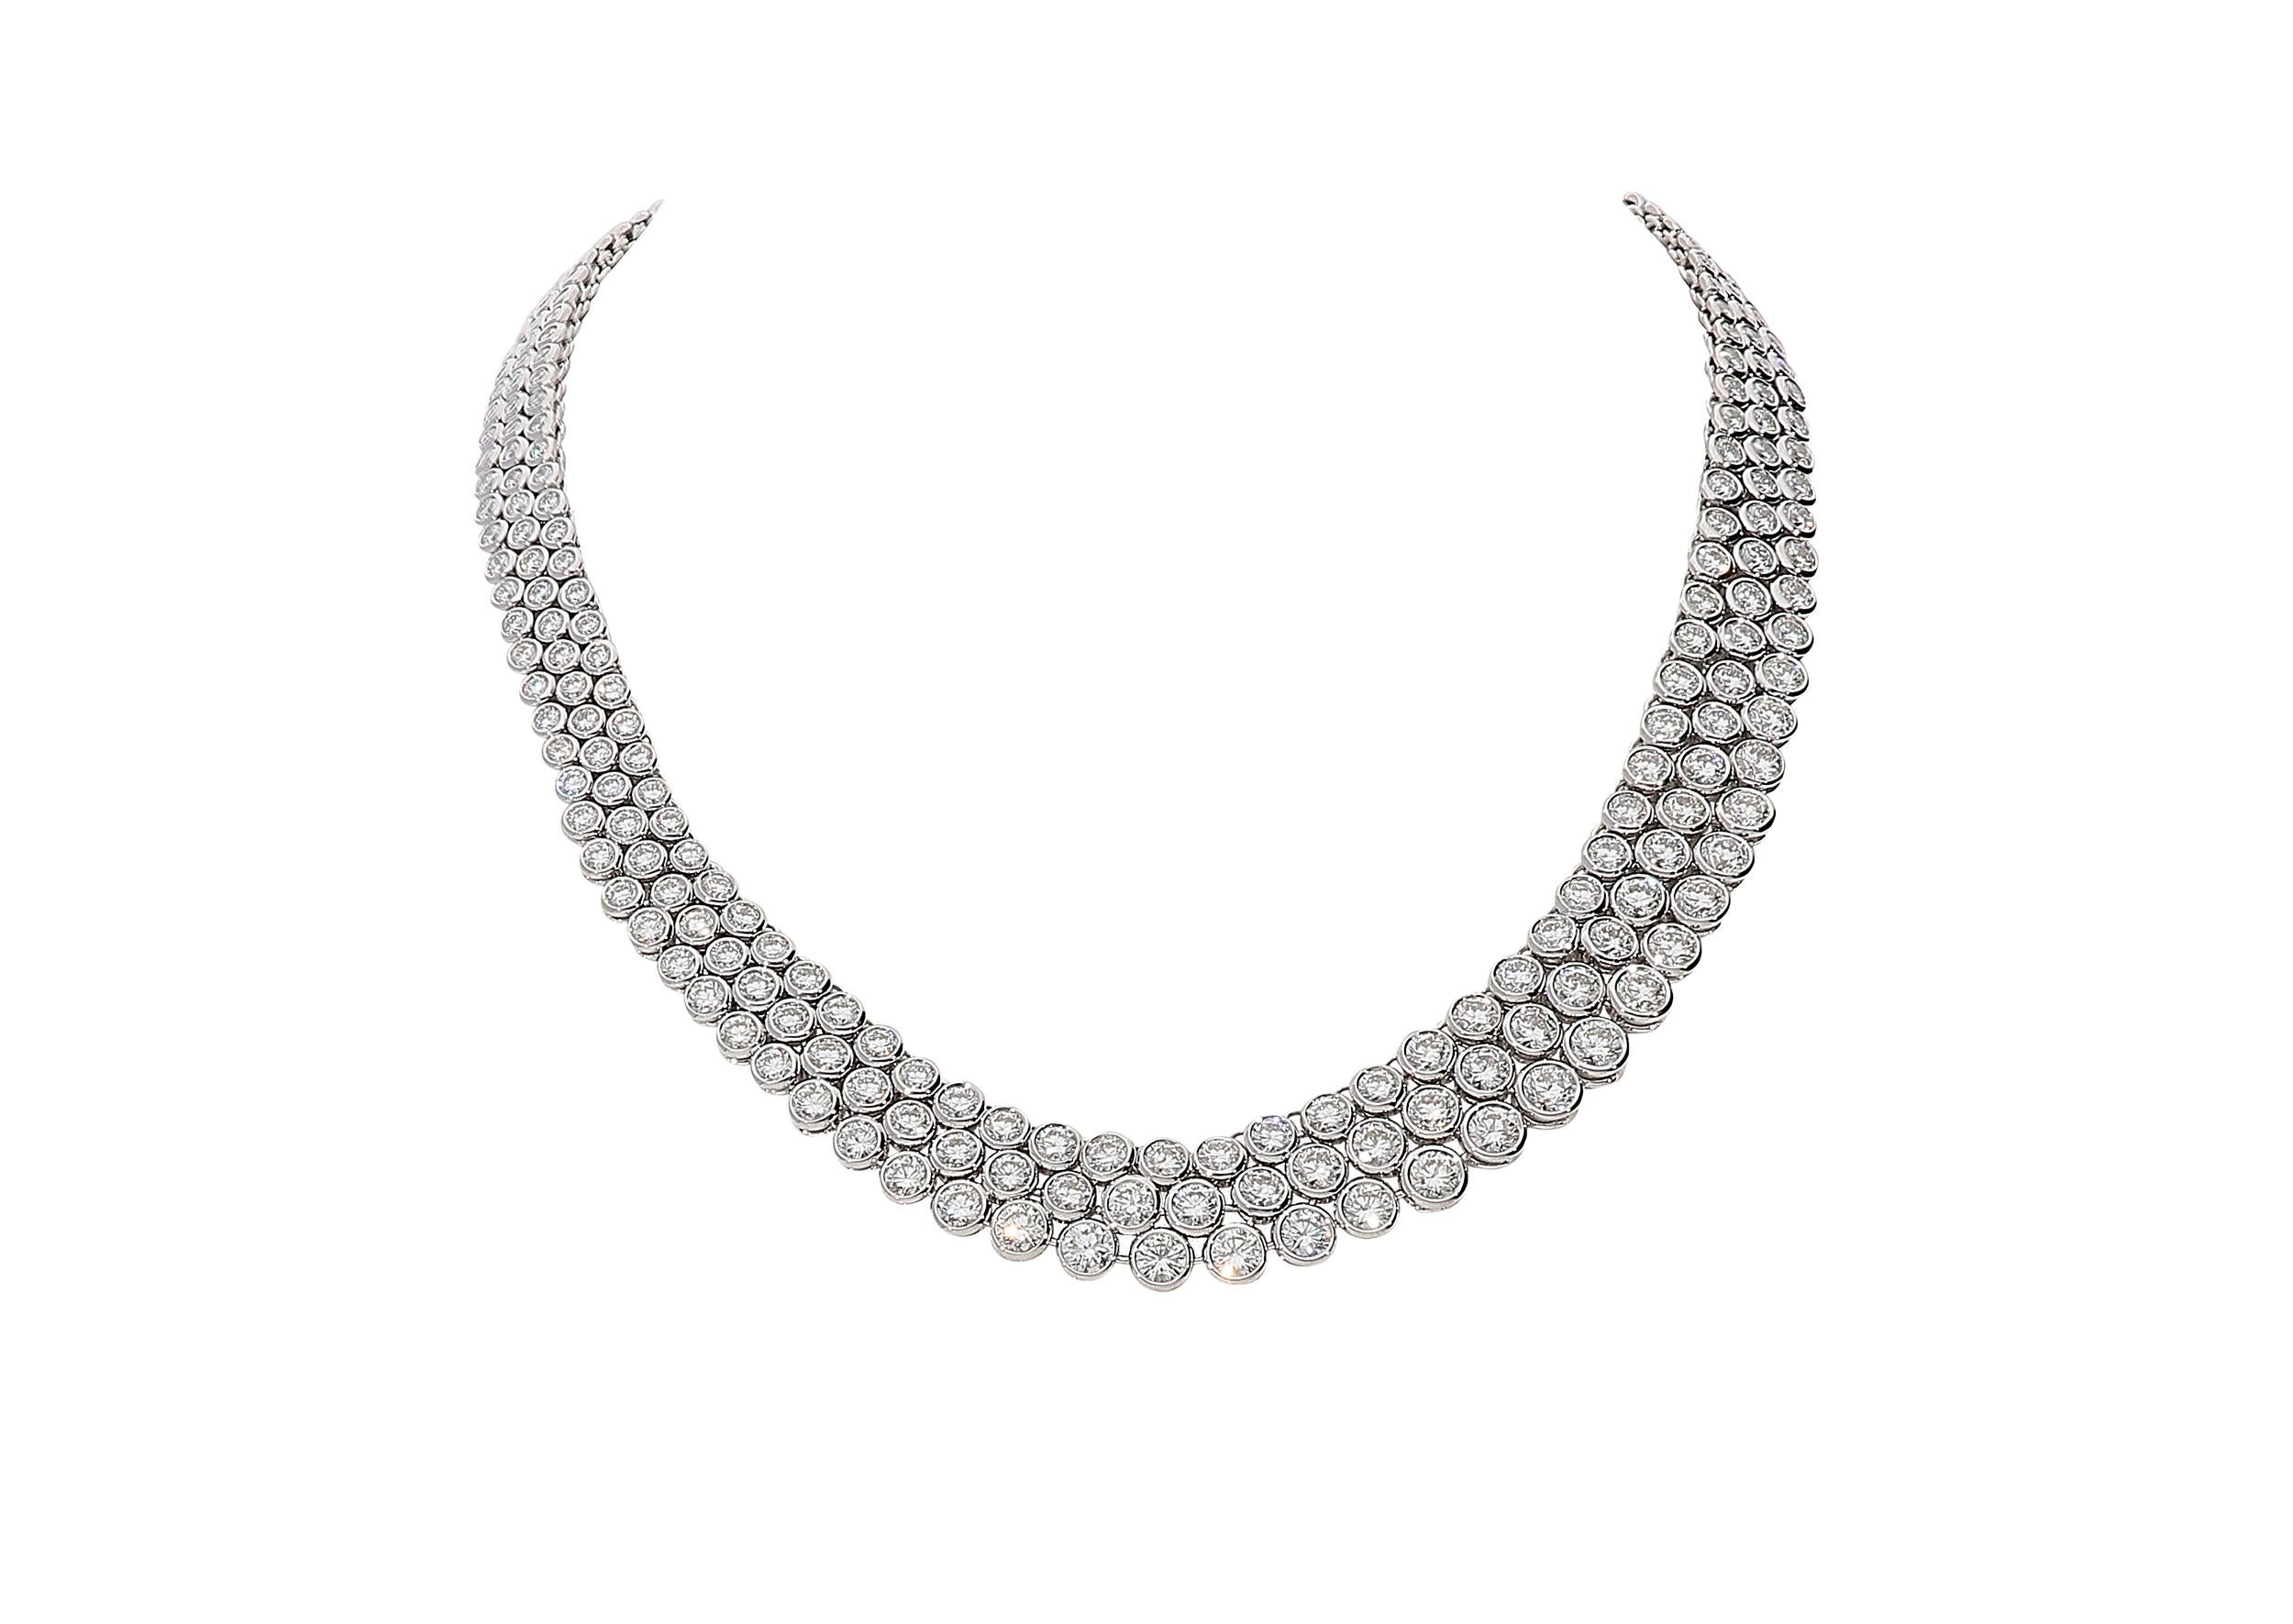 Stunning 3 rows tennis necklace with white round brilliant diamonds color G clarity VS for 31.98 carats. Each row sets different diamond sizes, from smaller to bigger in the front.
Its weight is 60,30 grams of 18kt white gold, 1,30 centimeters of